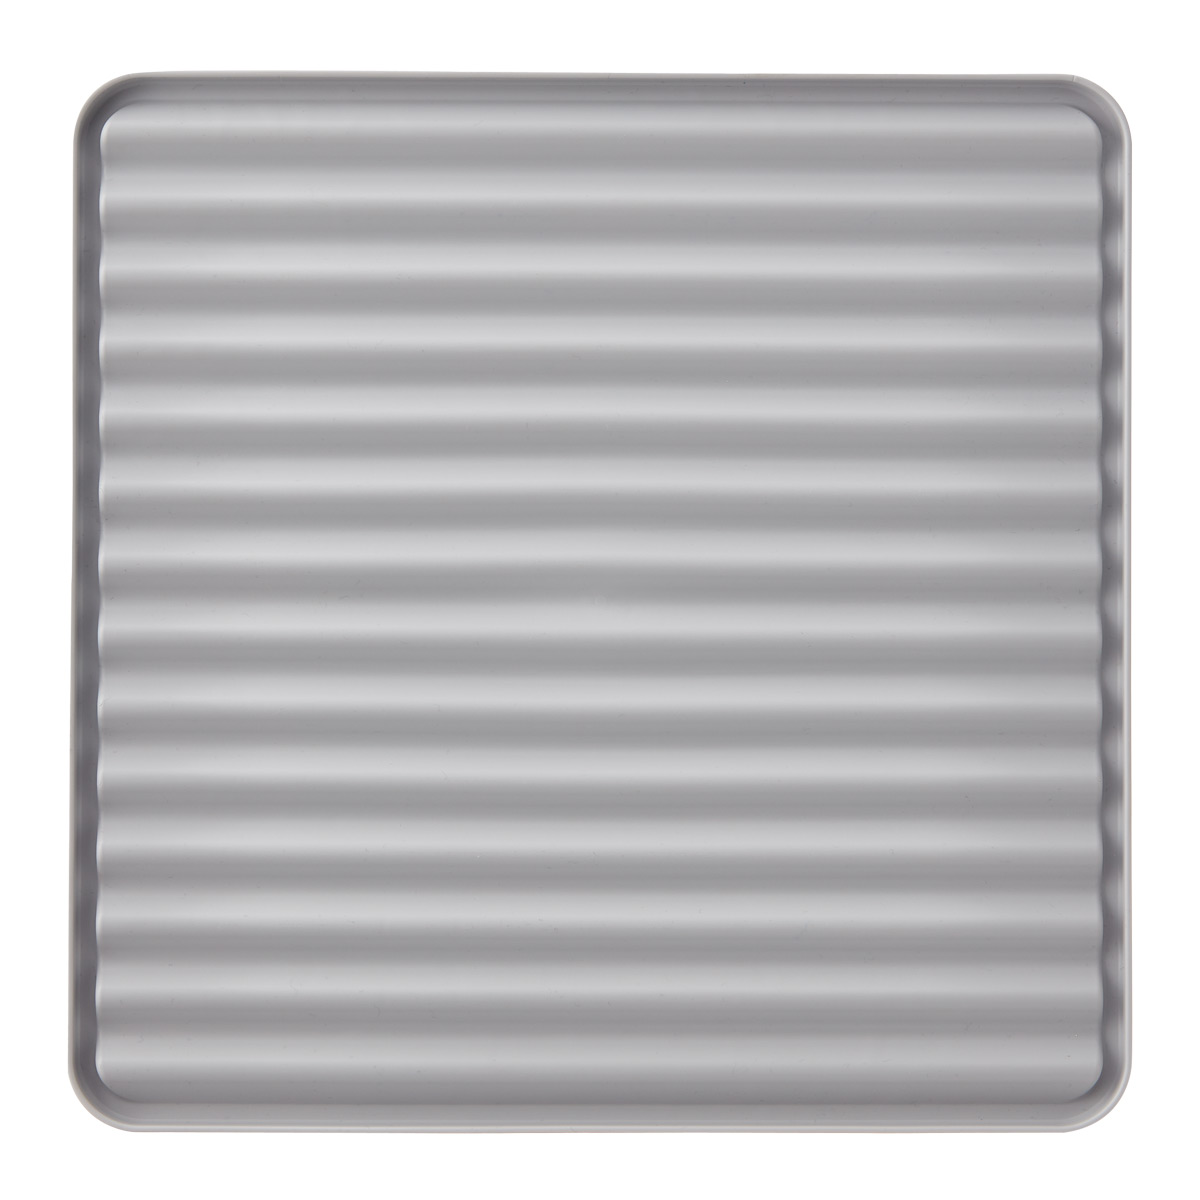 https://www.containerstore.com/catalogimages/470921/10088796-produce-mat-grey-v2.jpg